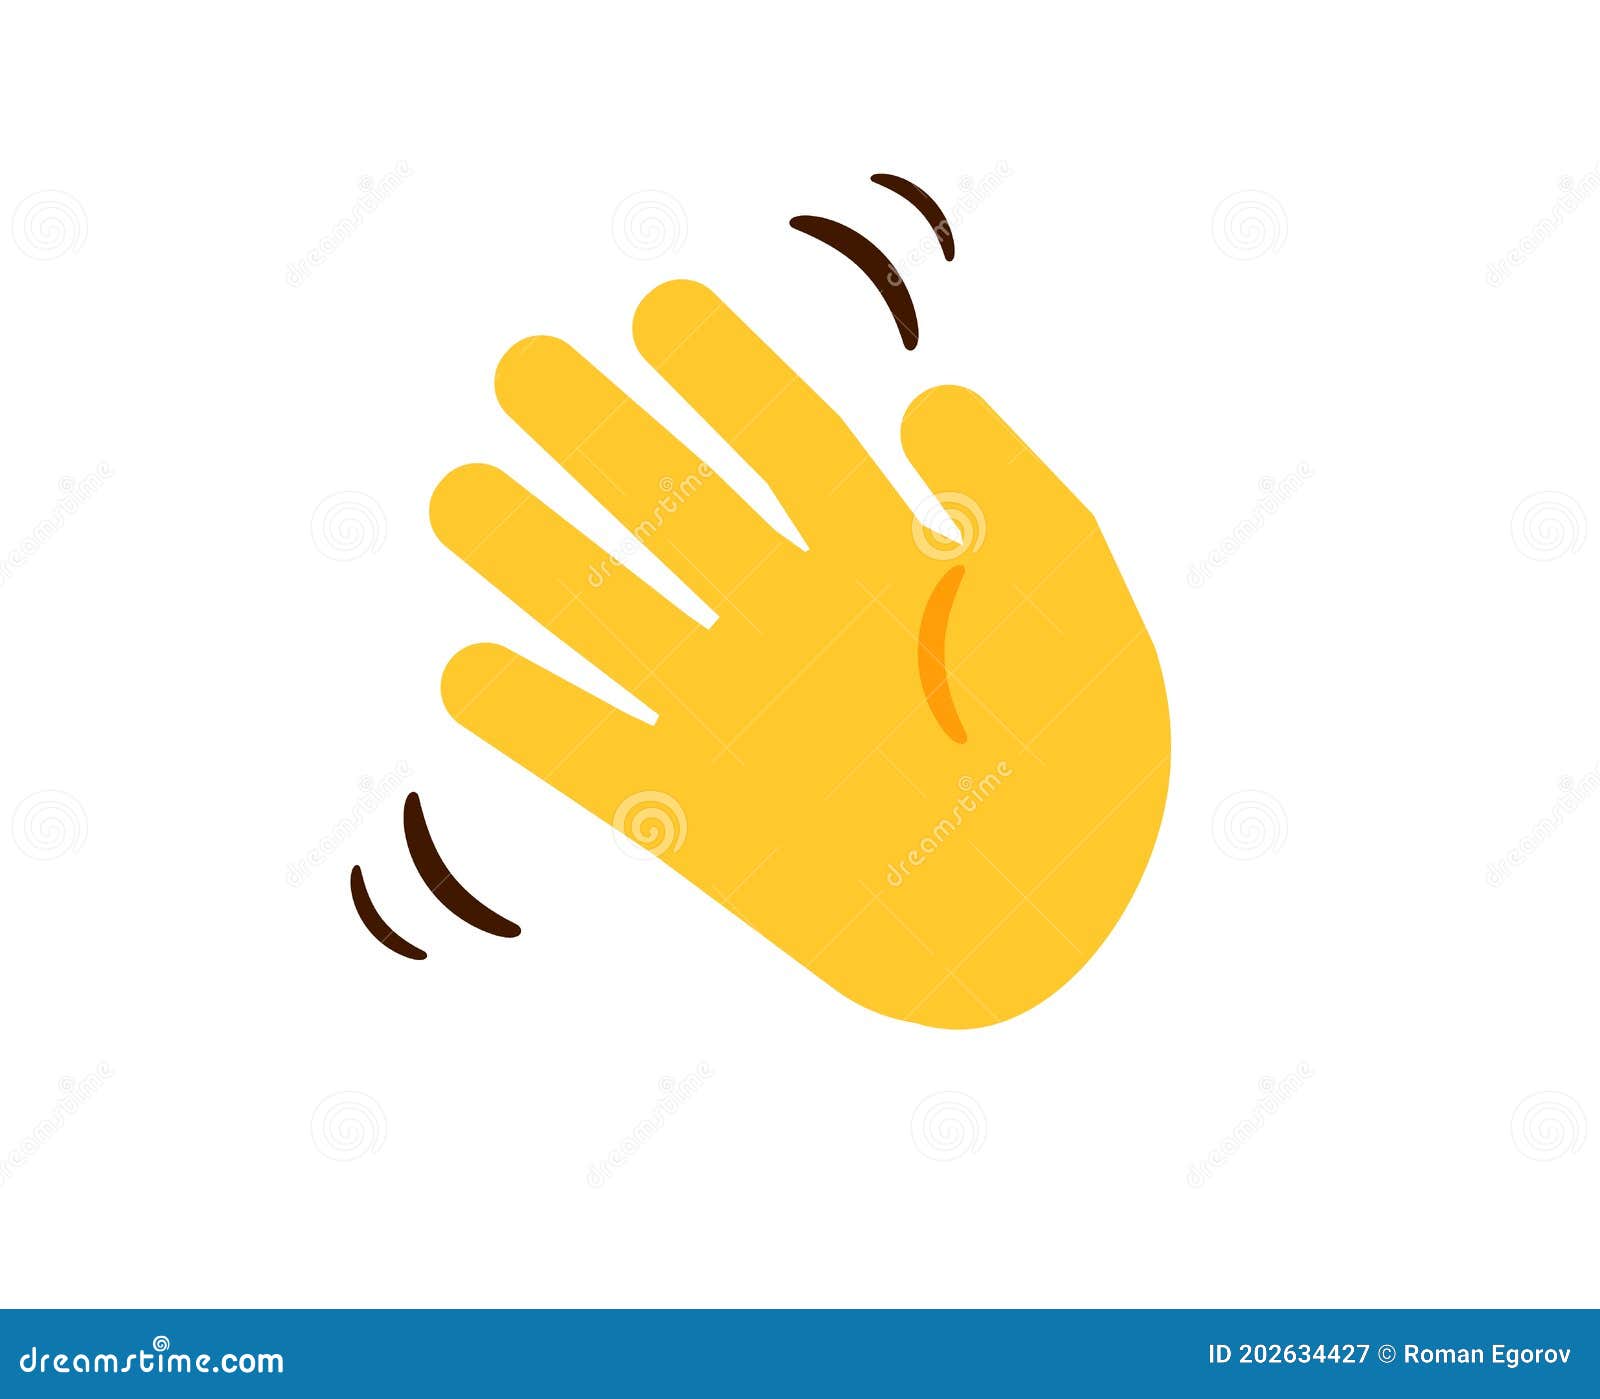 waving hand. cartoon moving human hand. gesture of greeting or goodbye. negative or disagreement sign.  limb on